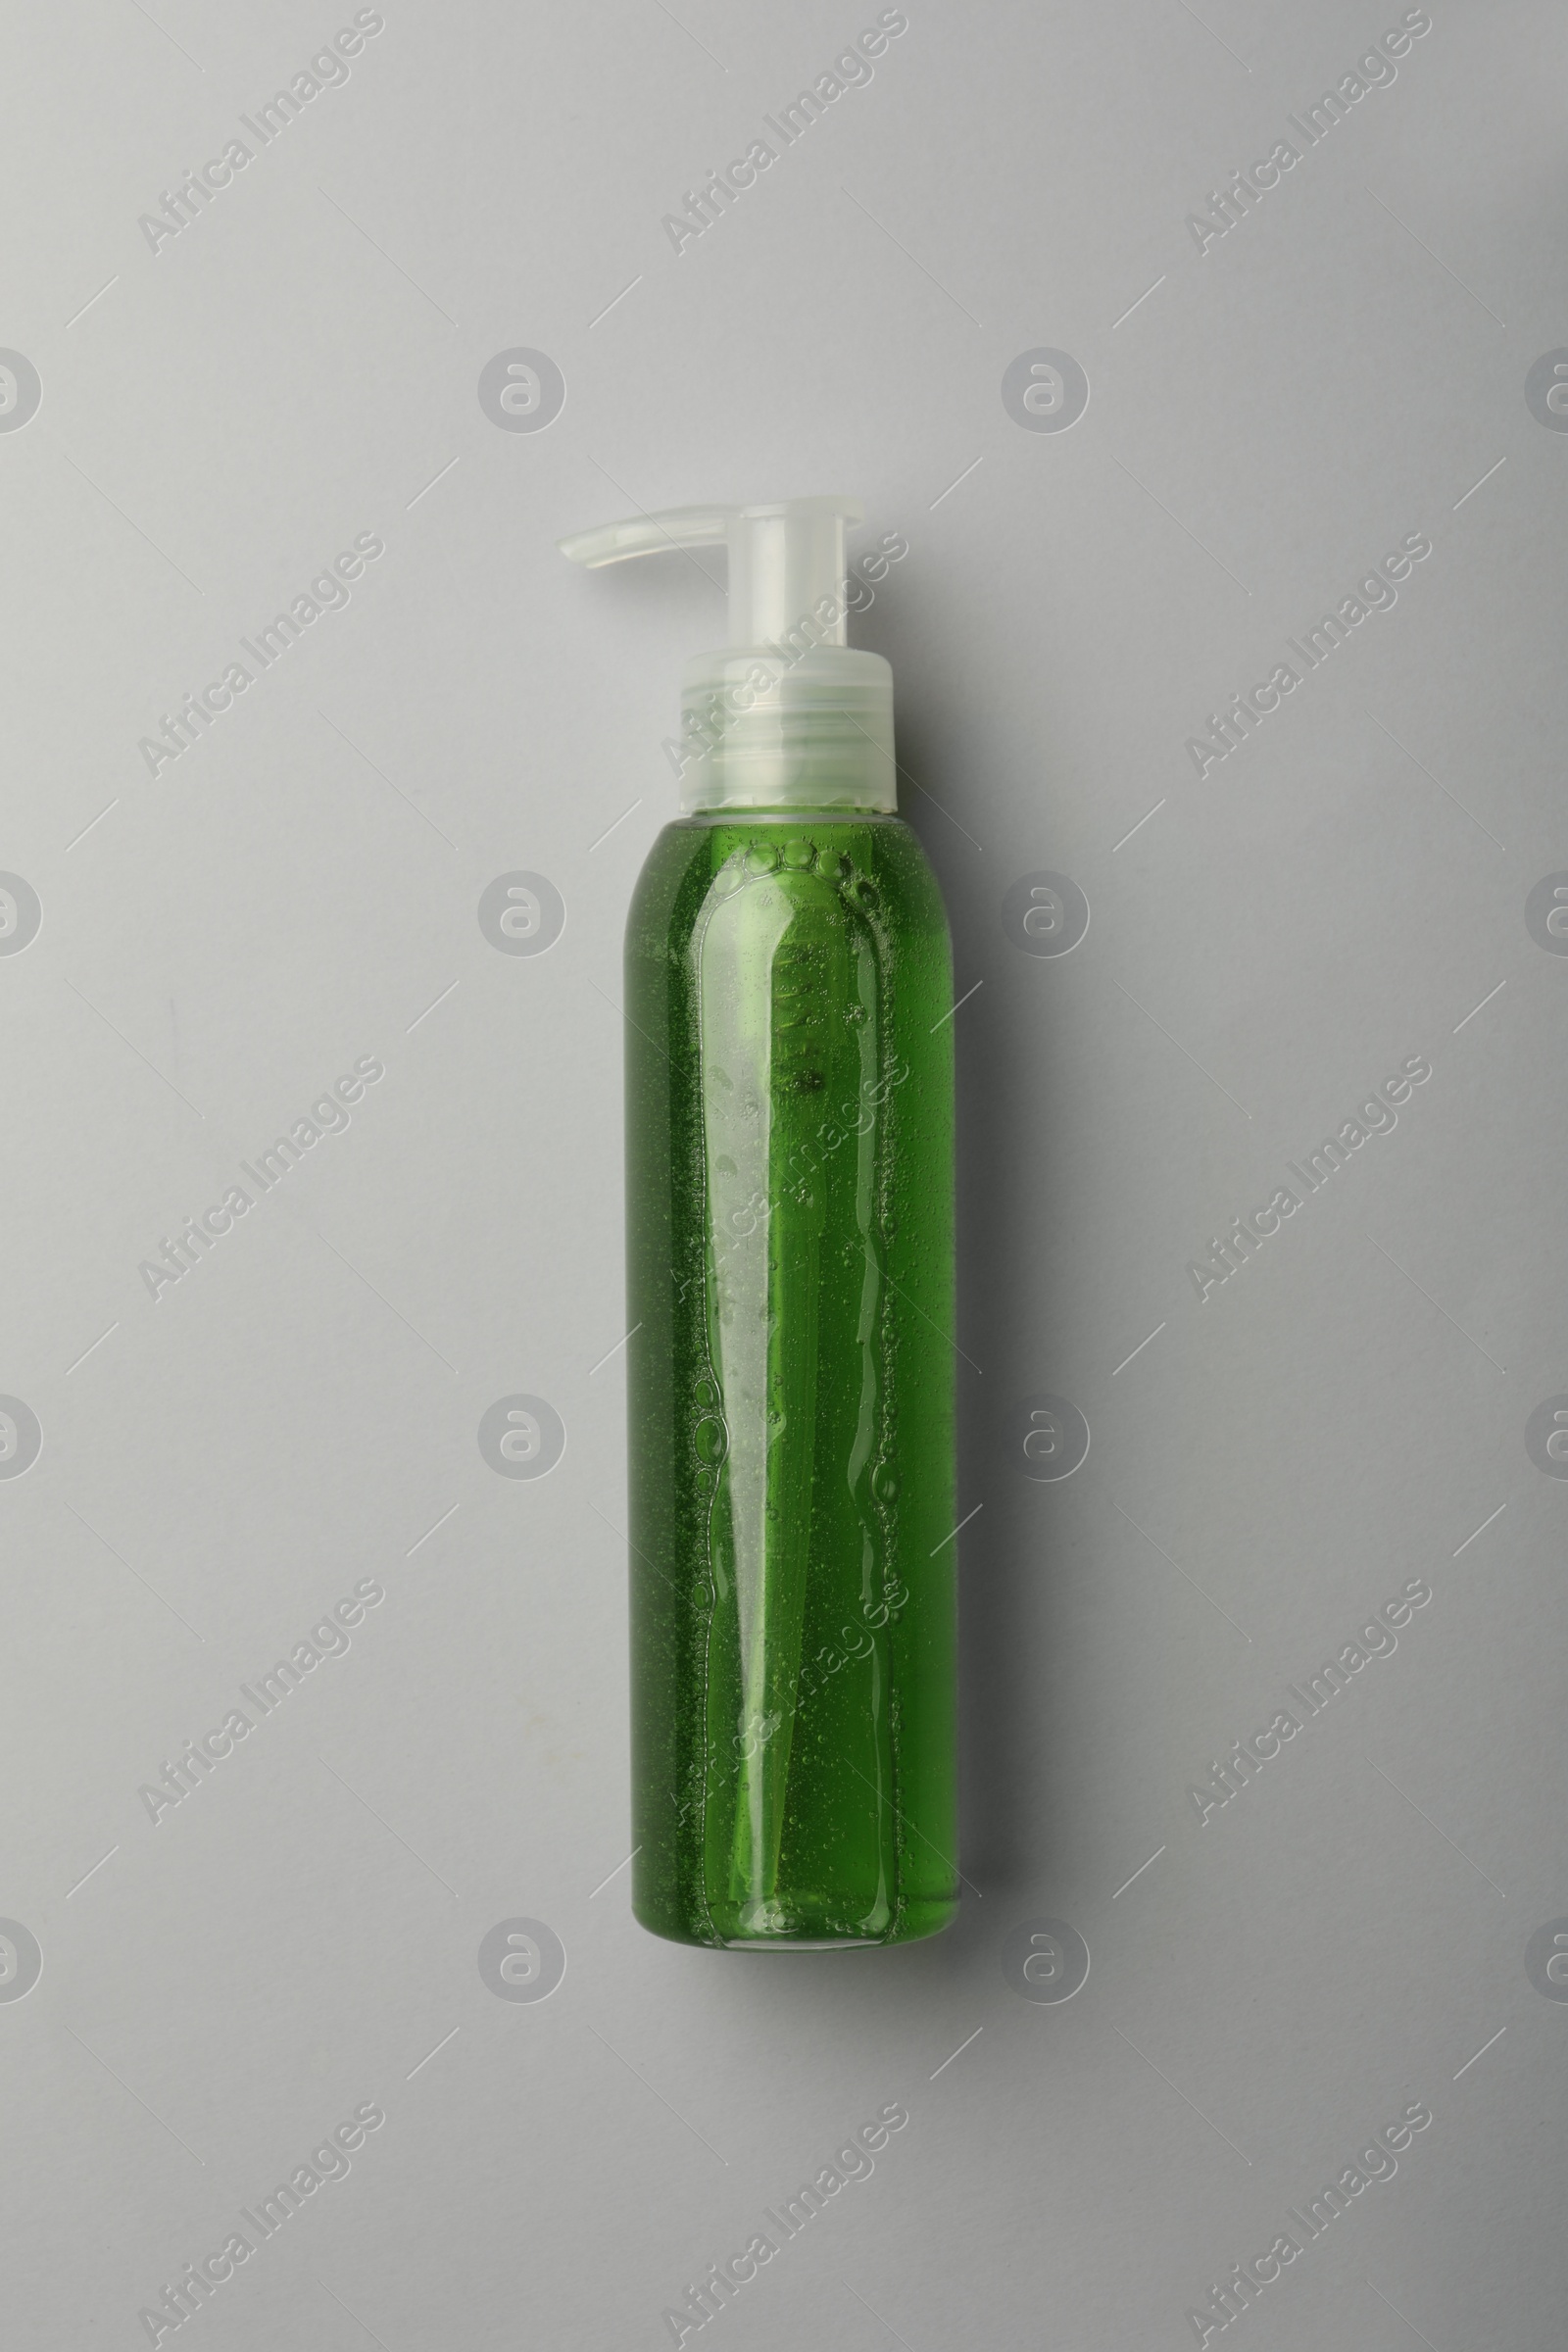 Photo of Bottle of green cosmetic gel on light background, top view